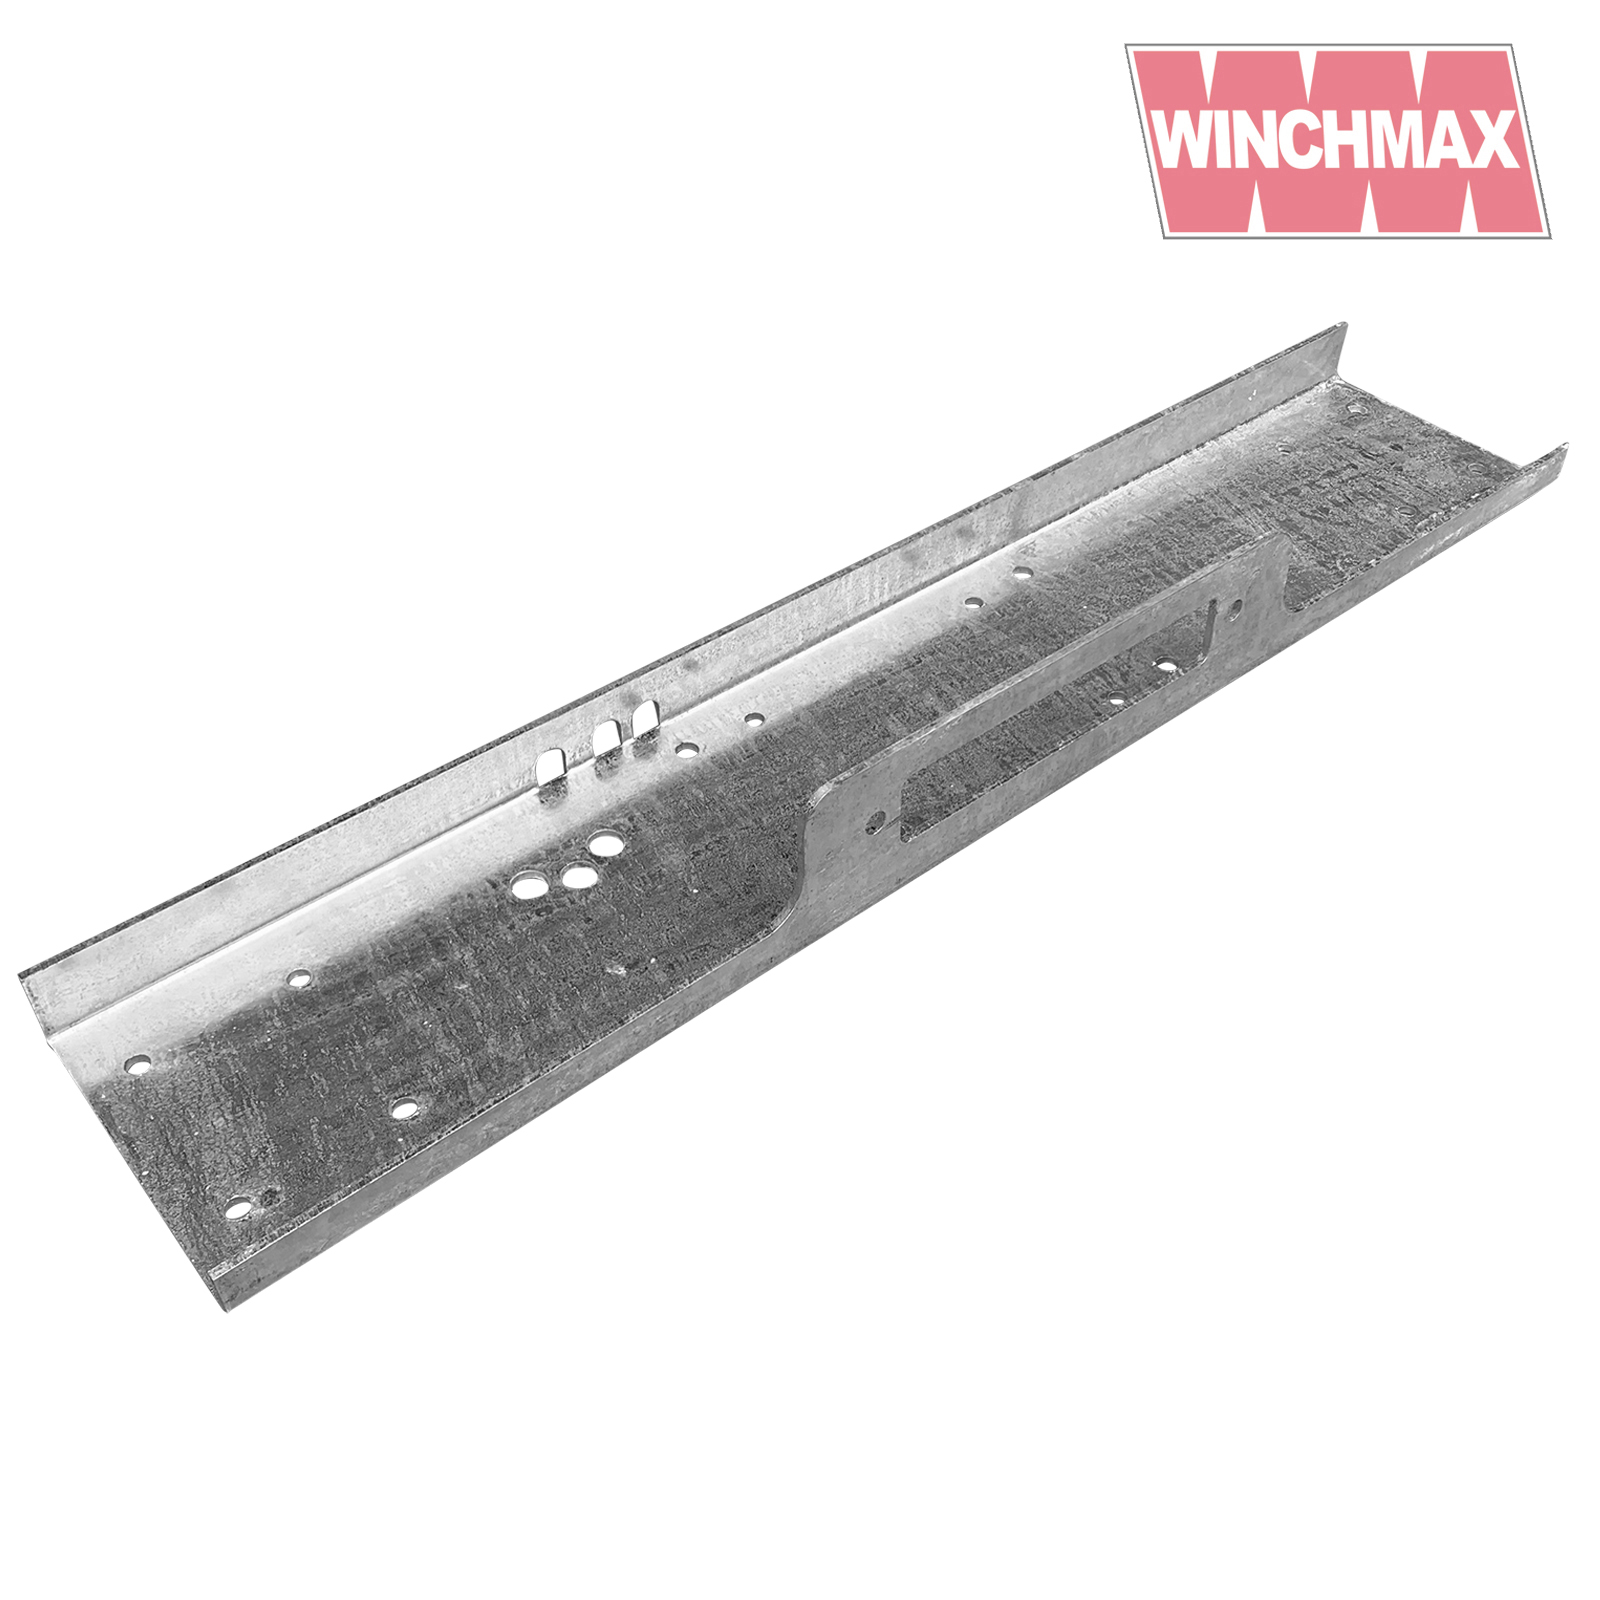 Galvanized Compact 13,500lb Winches Winch Mounting plate for 13,000lb